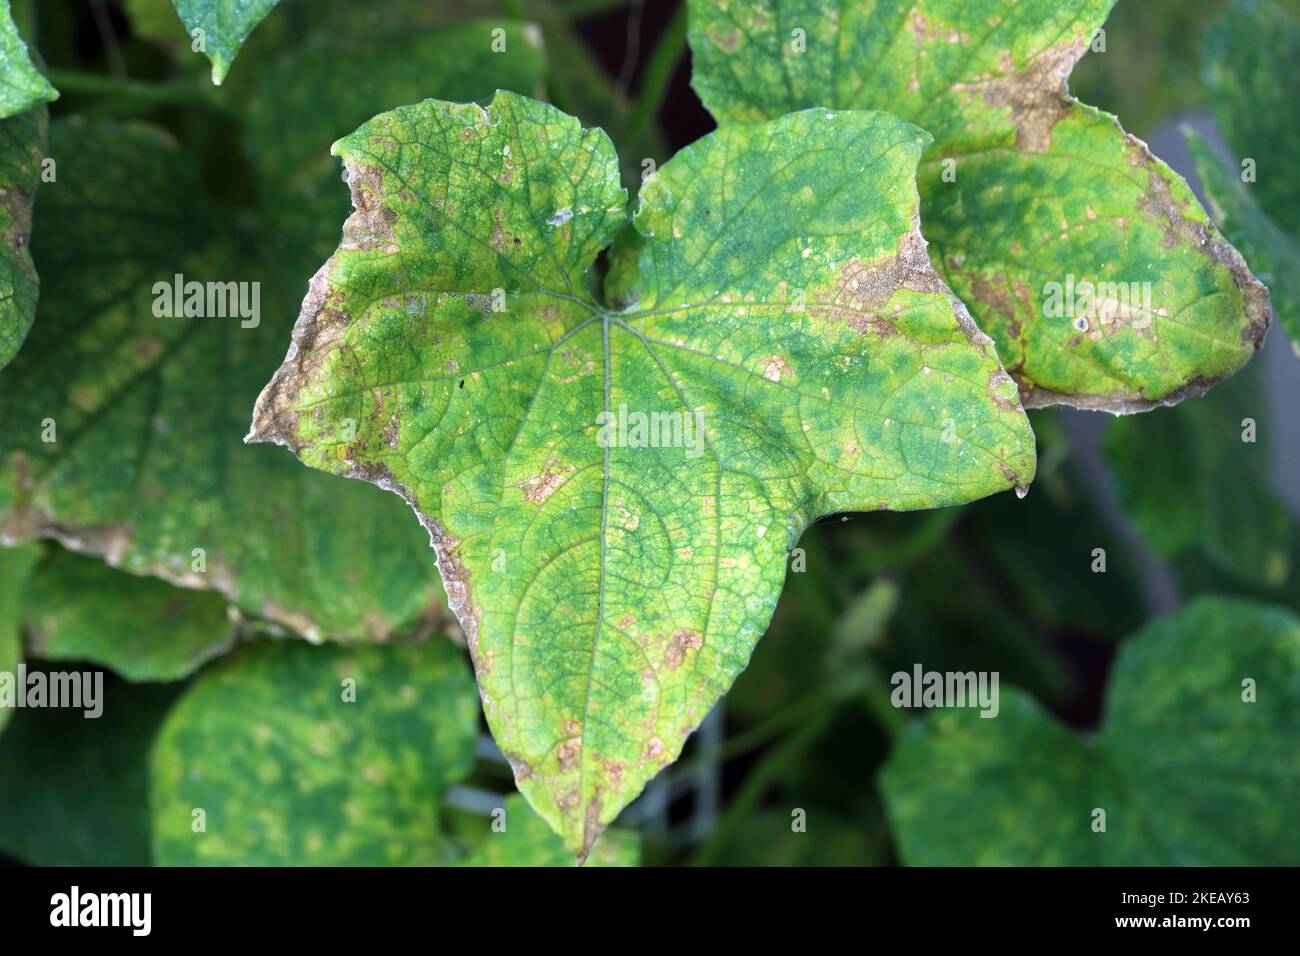 Cucumber leaf damaged by Tetranychus urticae (red spider mite or two-spotted spider mite). Stock Photo